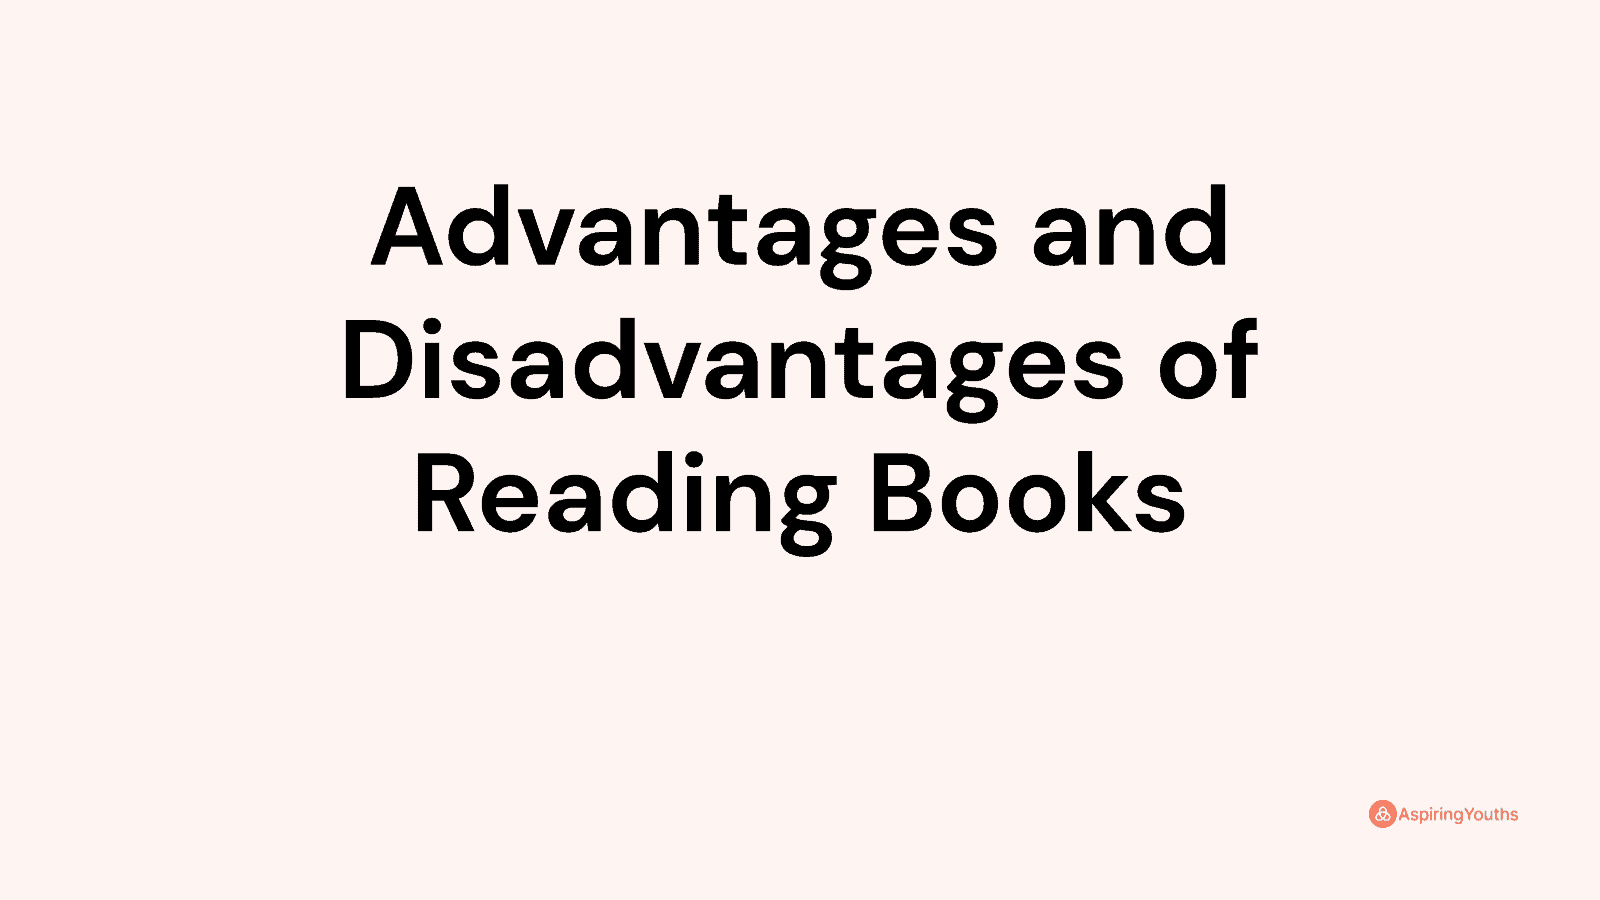 Advantages and disadvantages of Reading Books